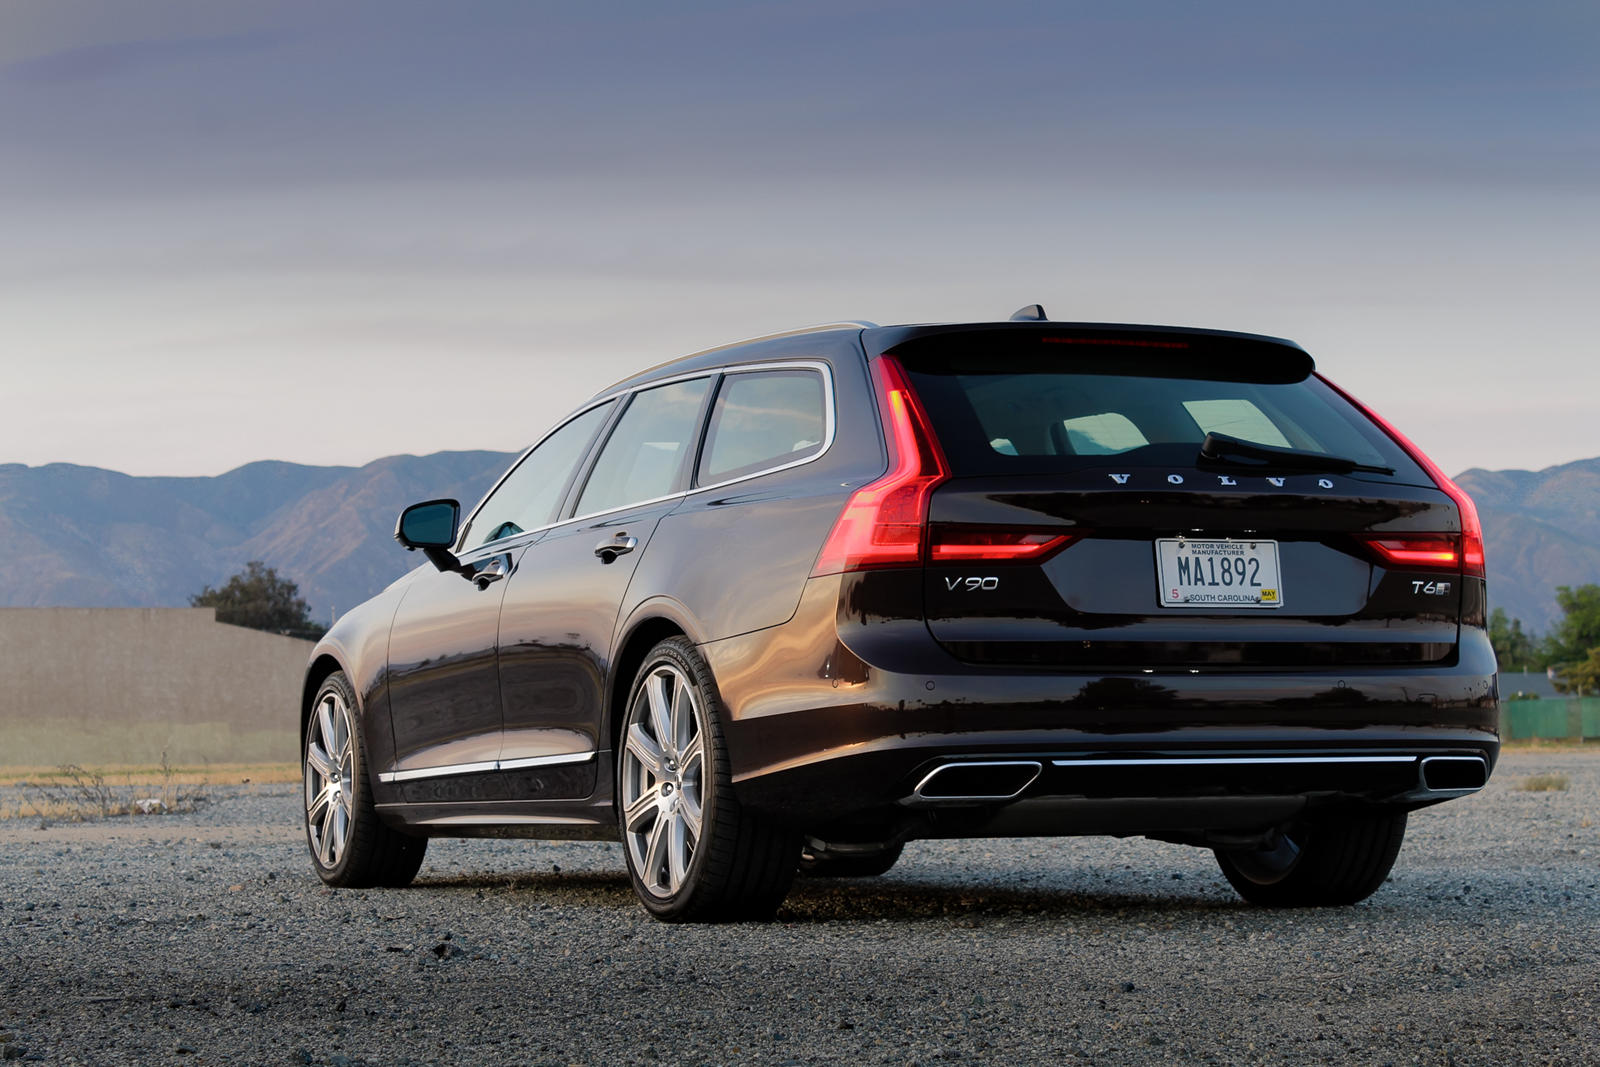 2020 Volvo V90 Interior Dimensions: Seating, Cargo Space & Trunk Size -  Photos | CarBuzz